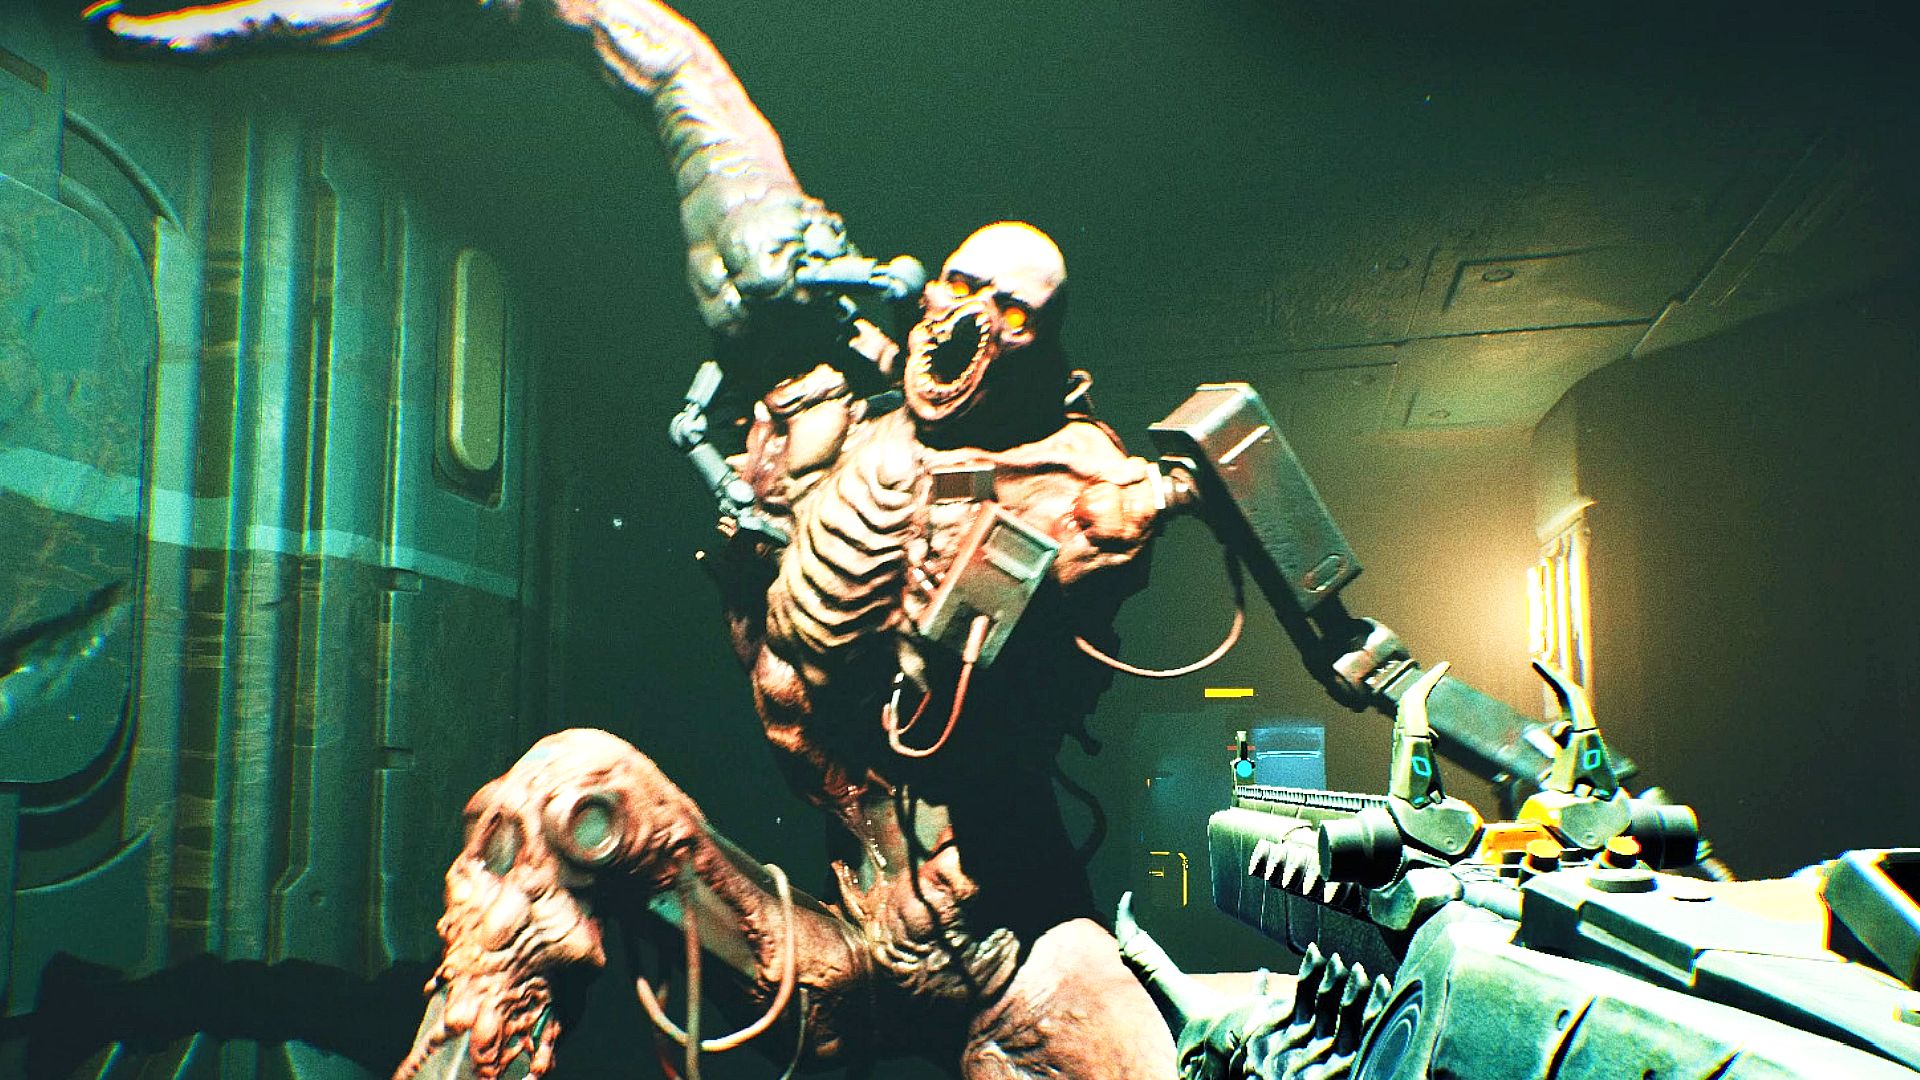 Doom-like horror game Ripout has a mechanic that belongs in every FPS